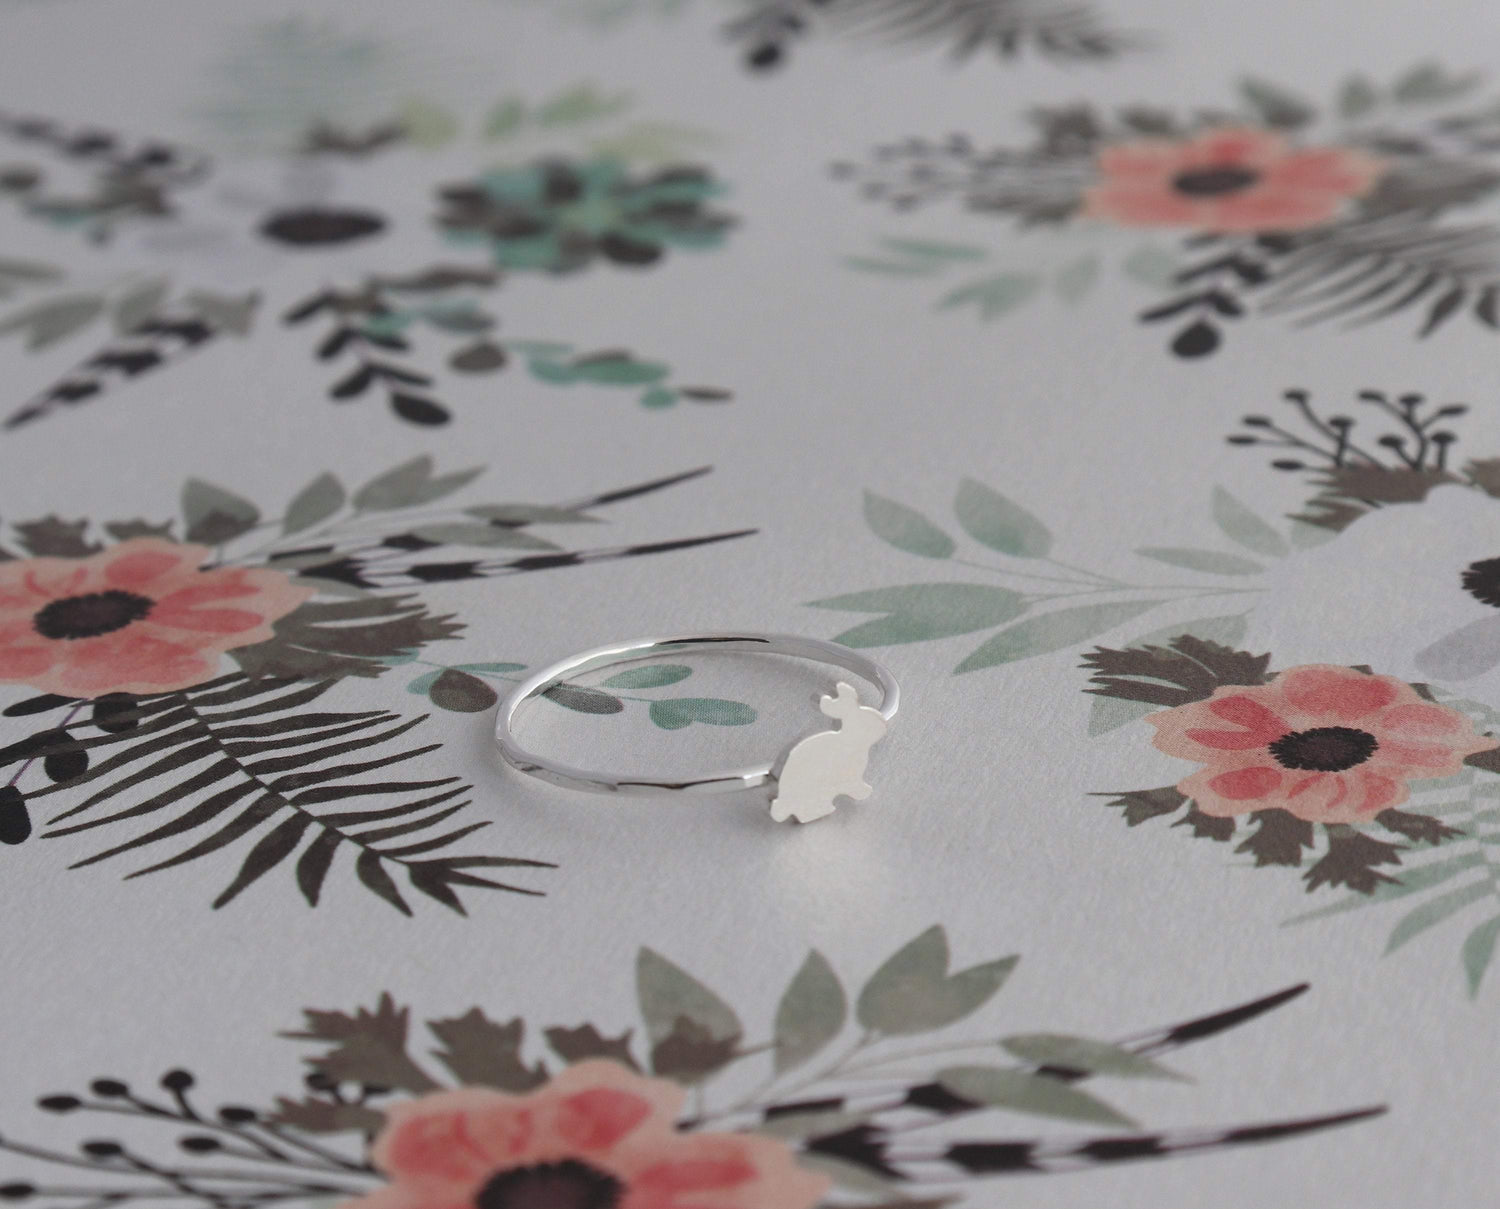 Bunny Ring with thin band - Sweet November Jewelry